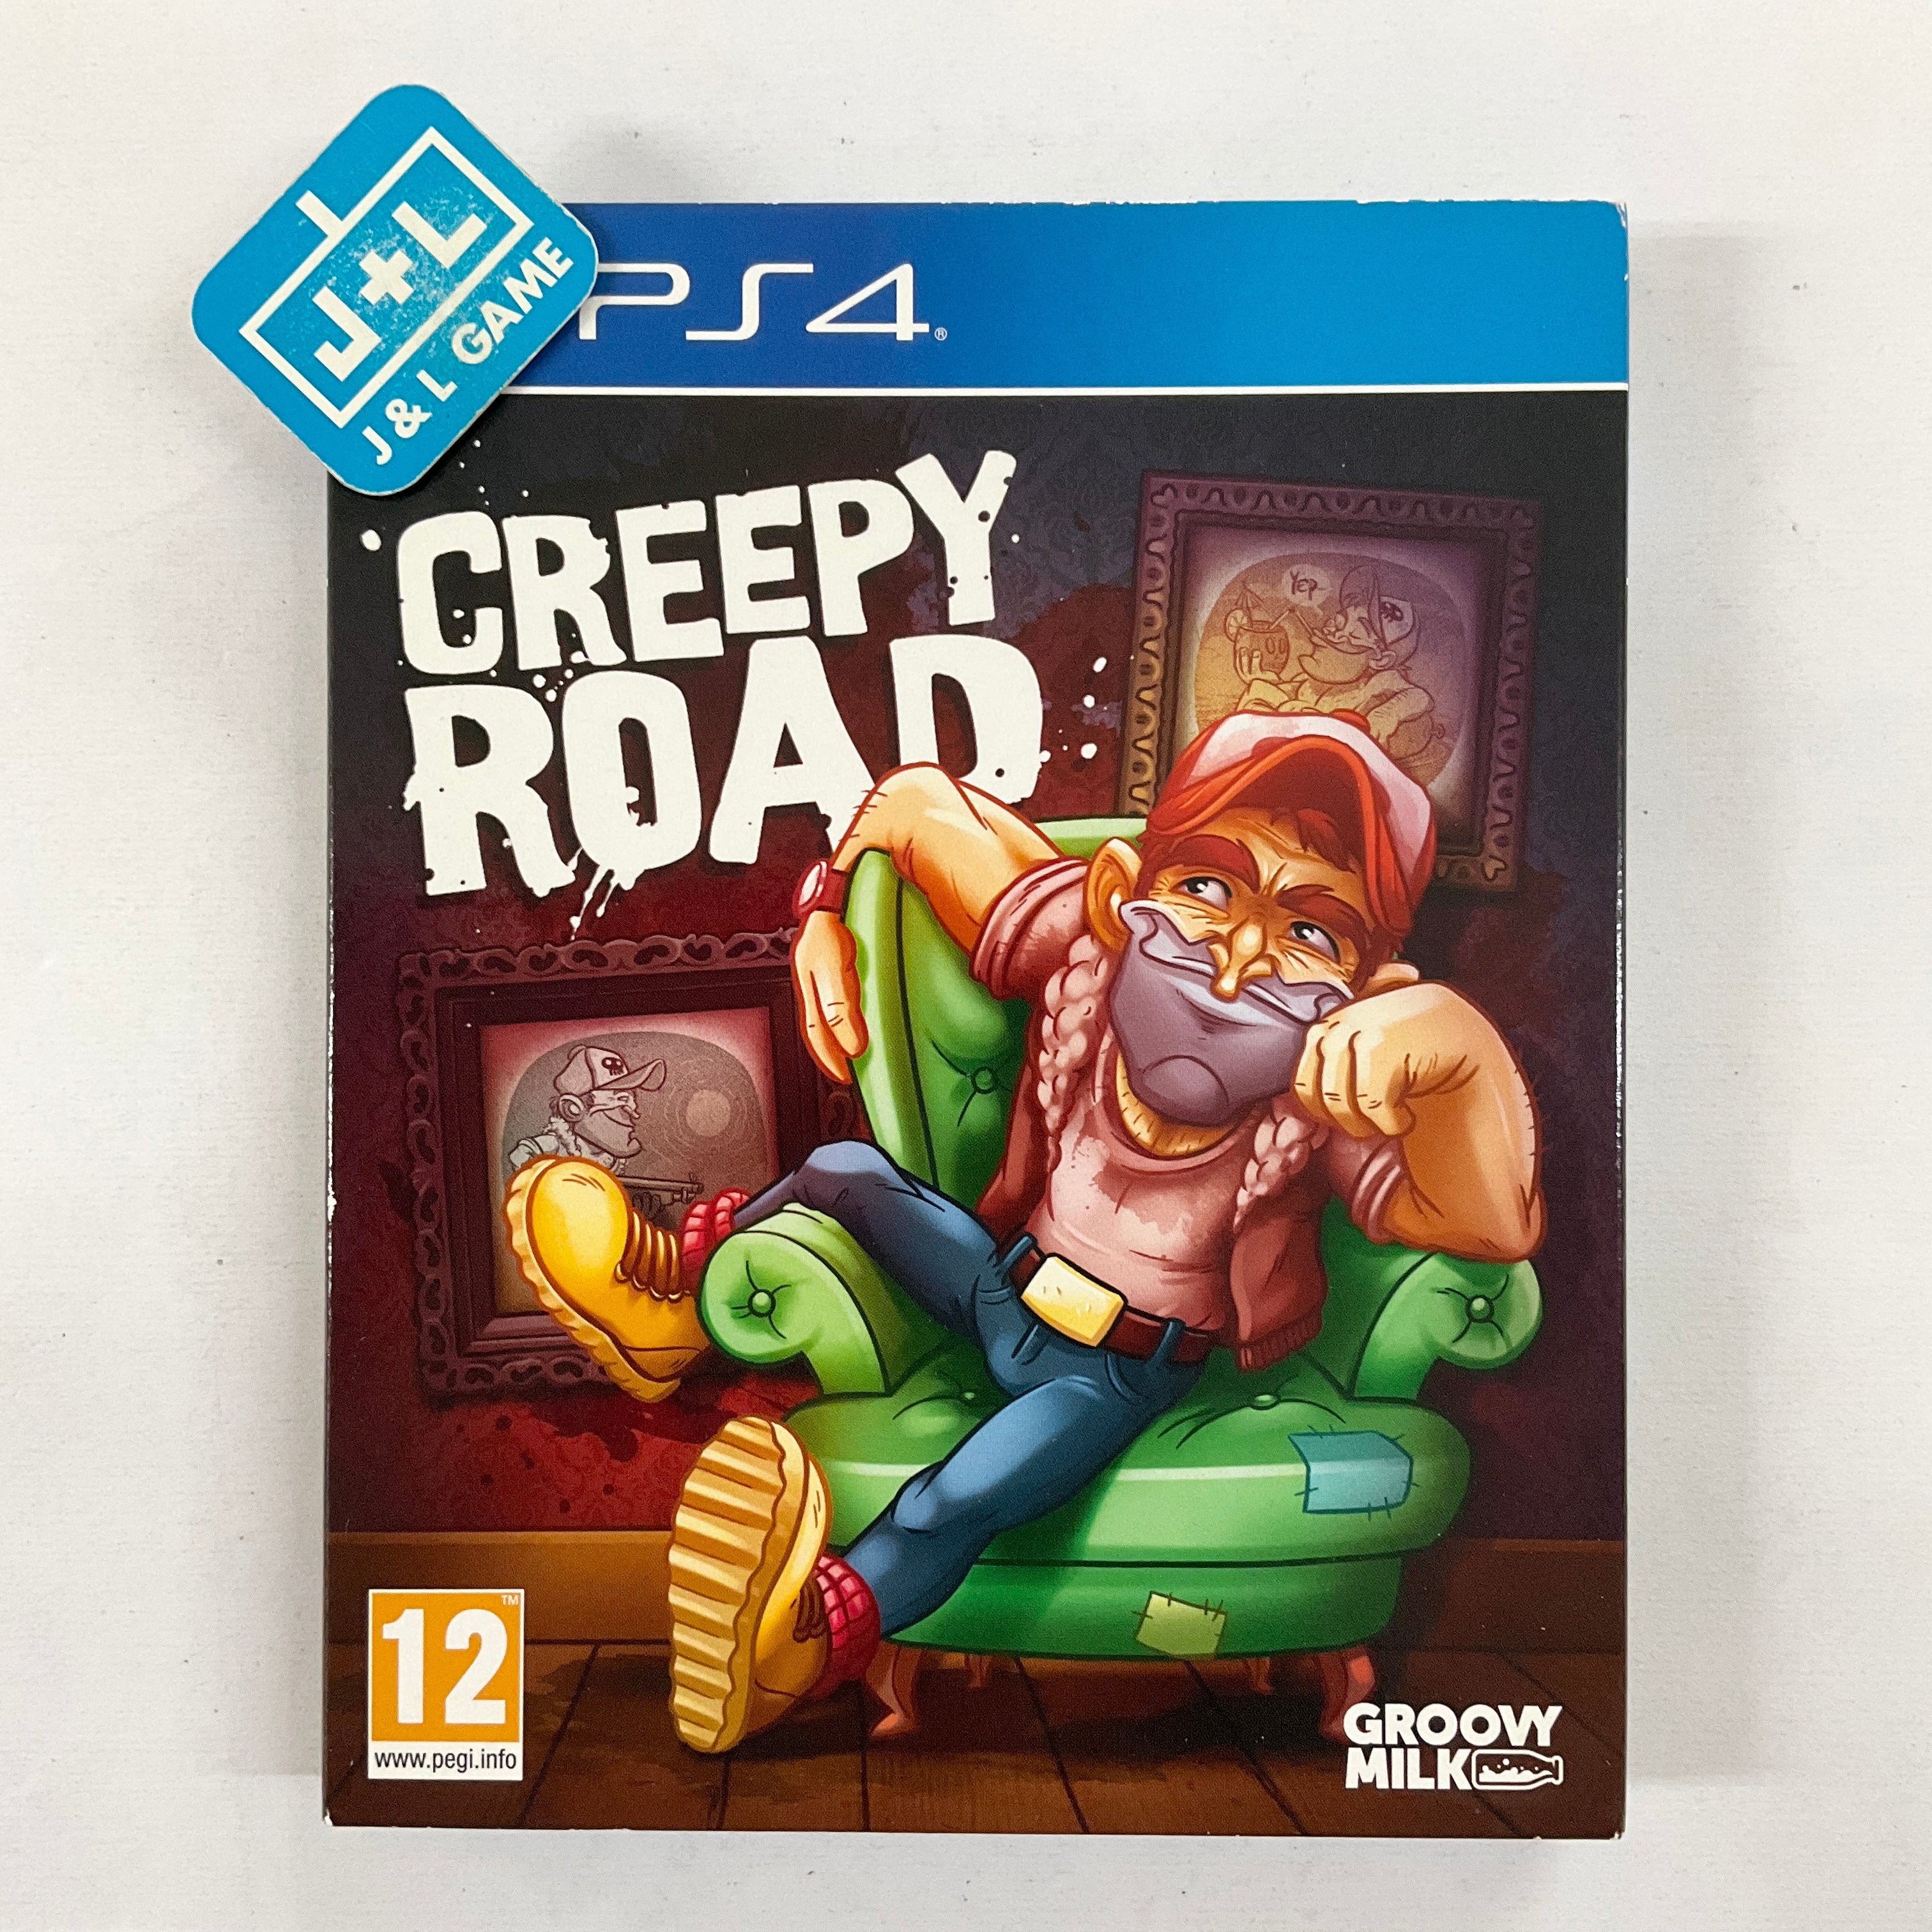 Creepy Road - (PS4) PlayStation 4 [Pre-Owned] (European Import)